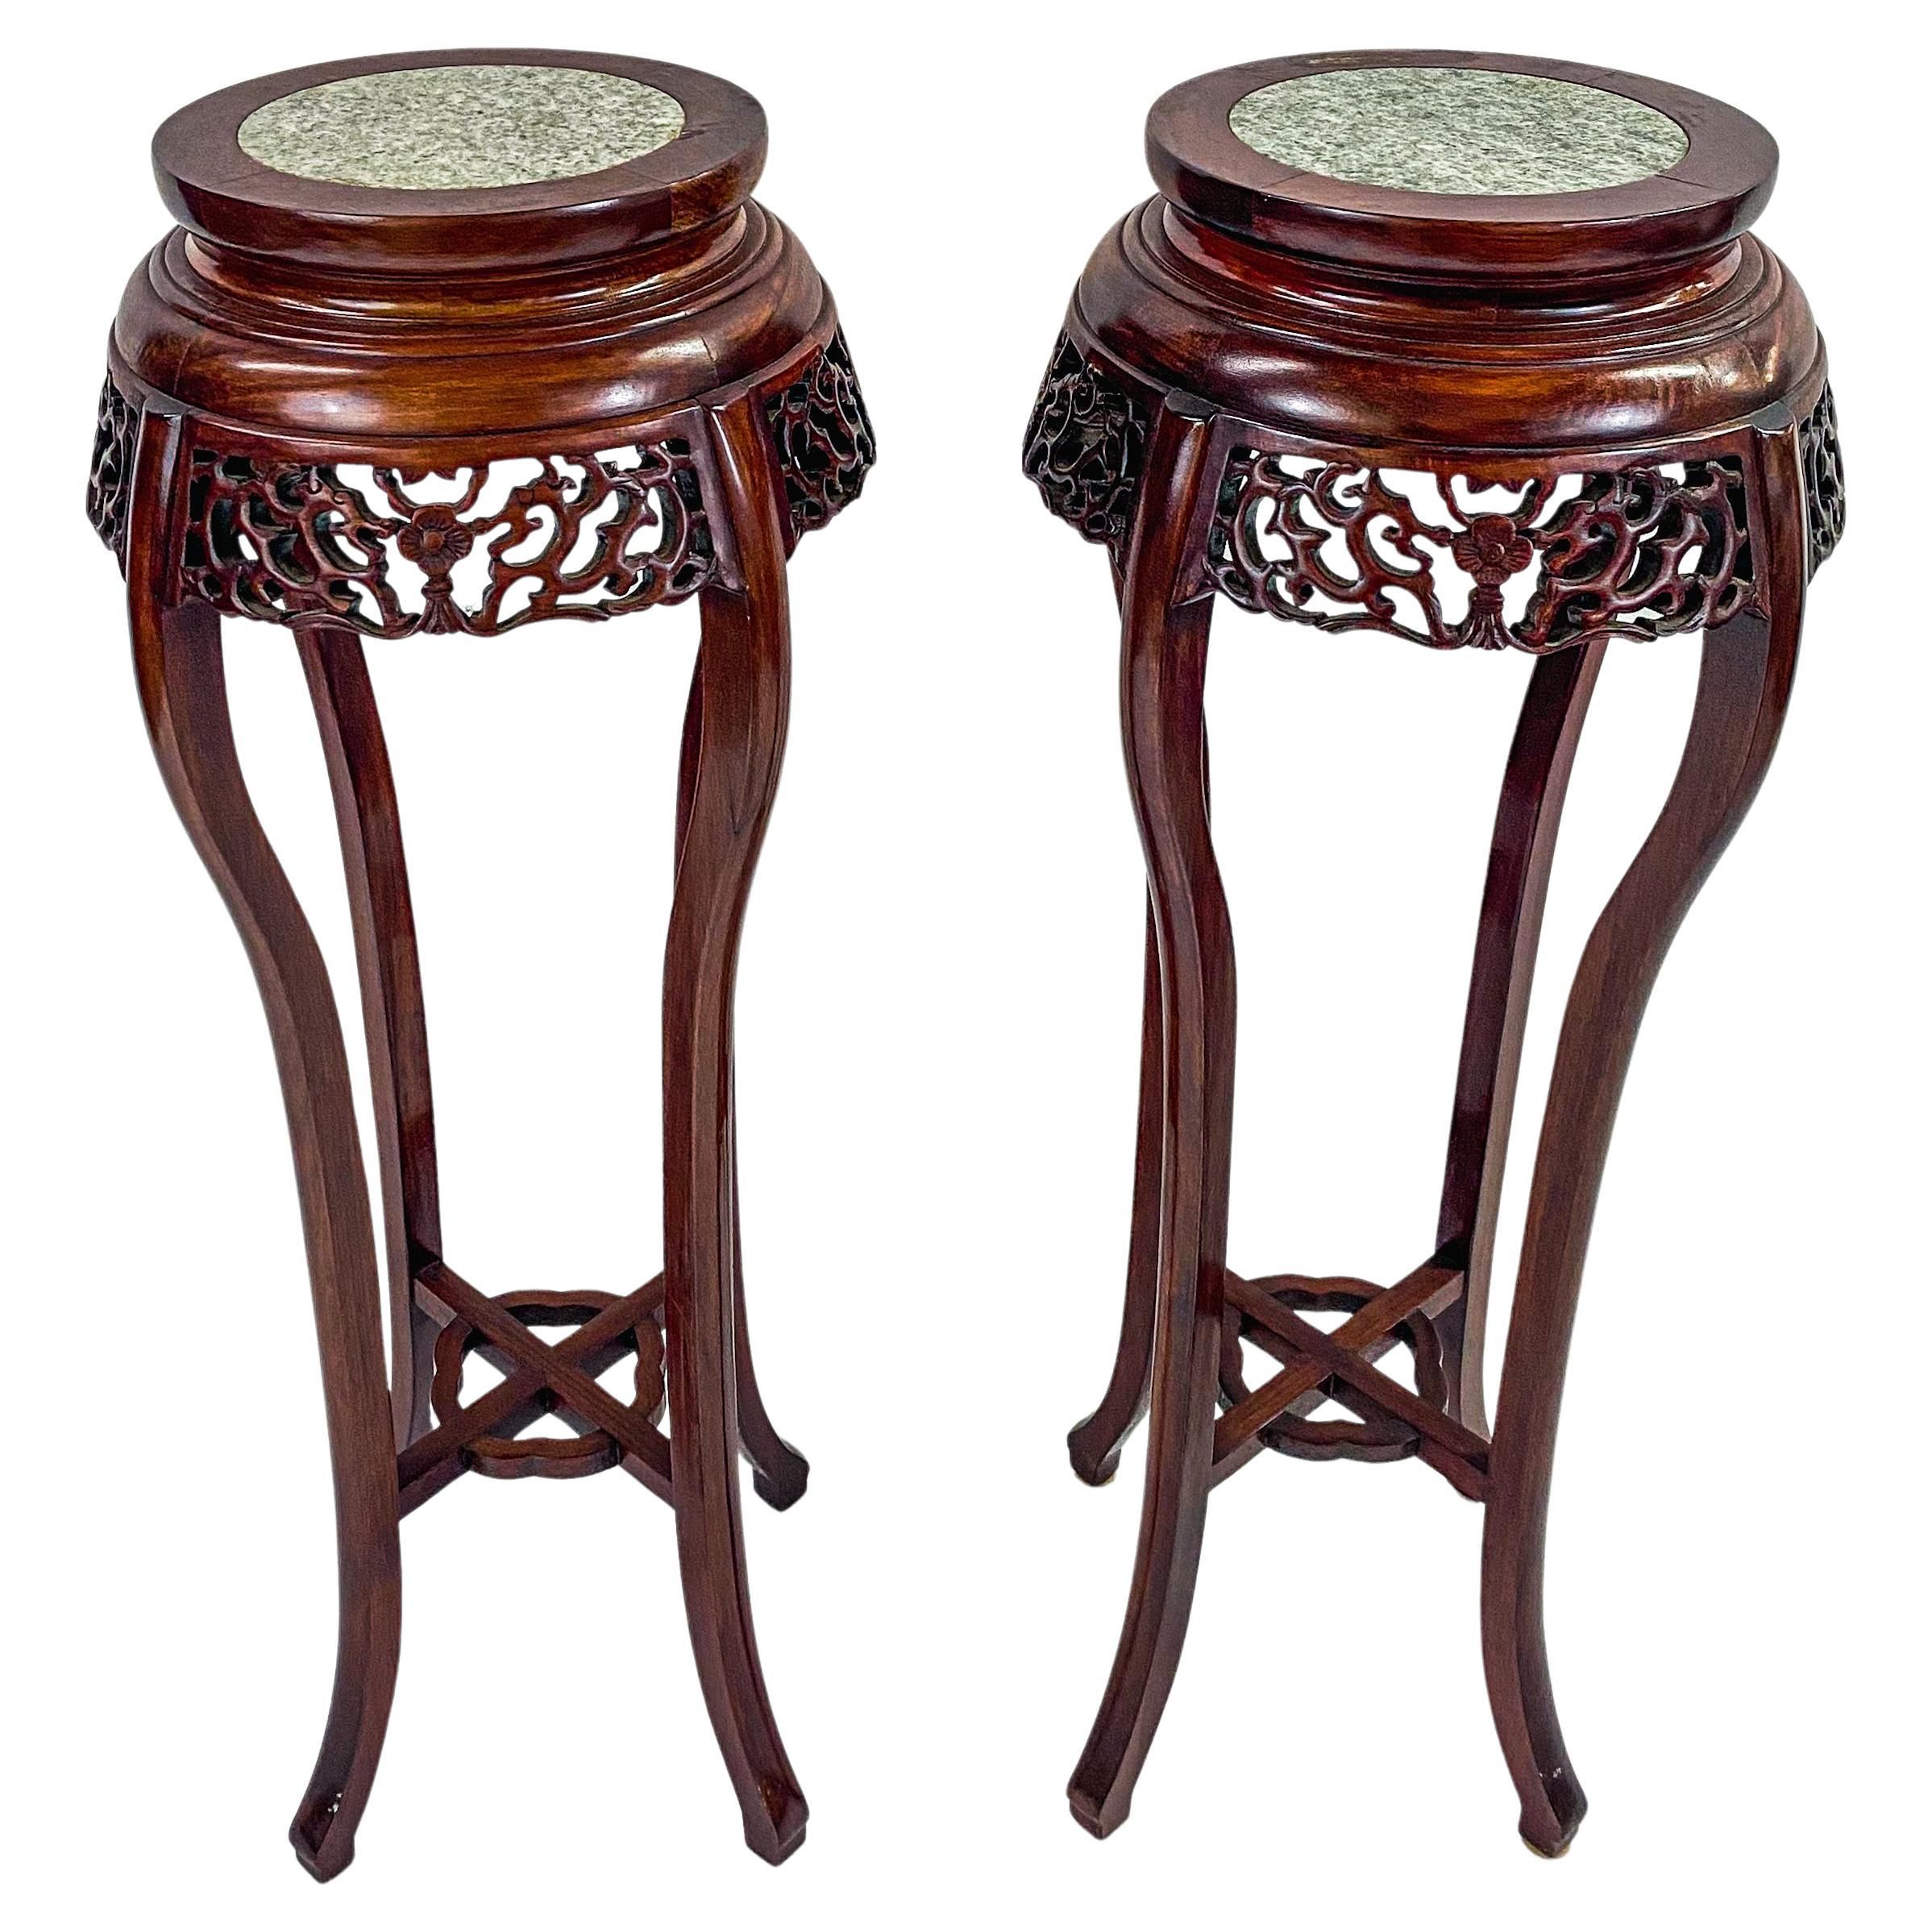 Oriental Chinese Carved Rosewood Pedestal, Plant Stand With Granite Top, A  Pair For Sale At 1stdibs Inside Carved Plant Stands (View 2 of 15)